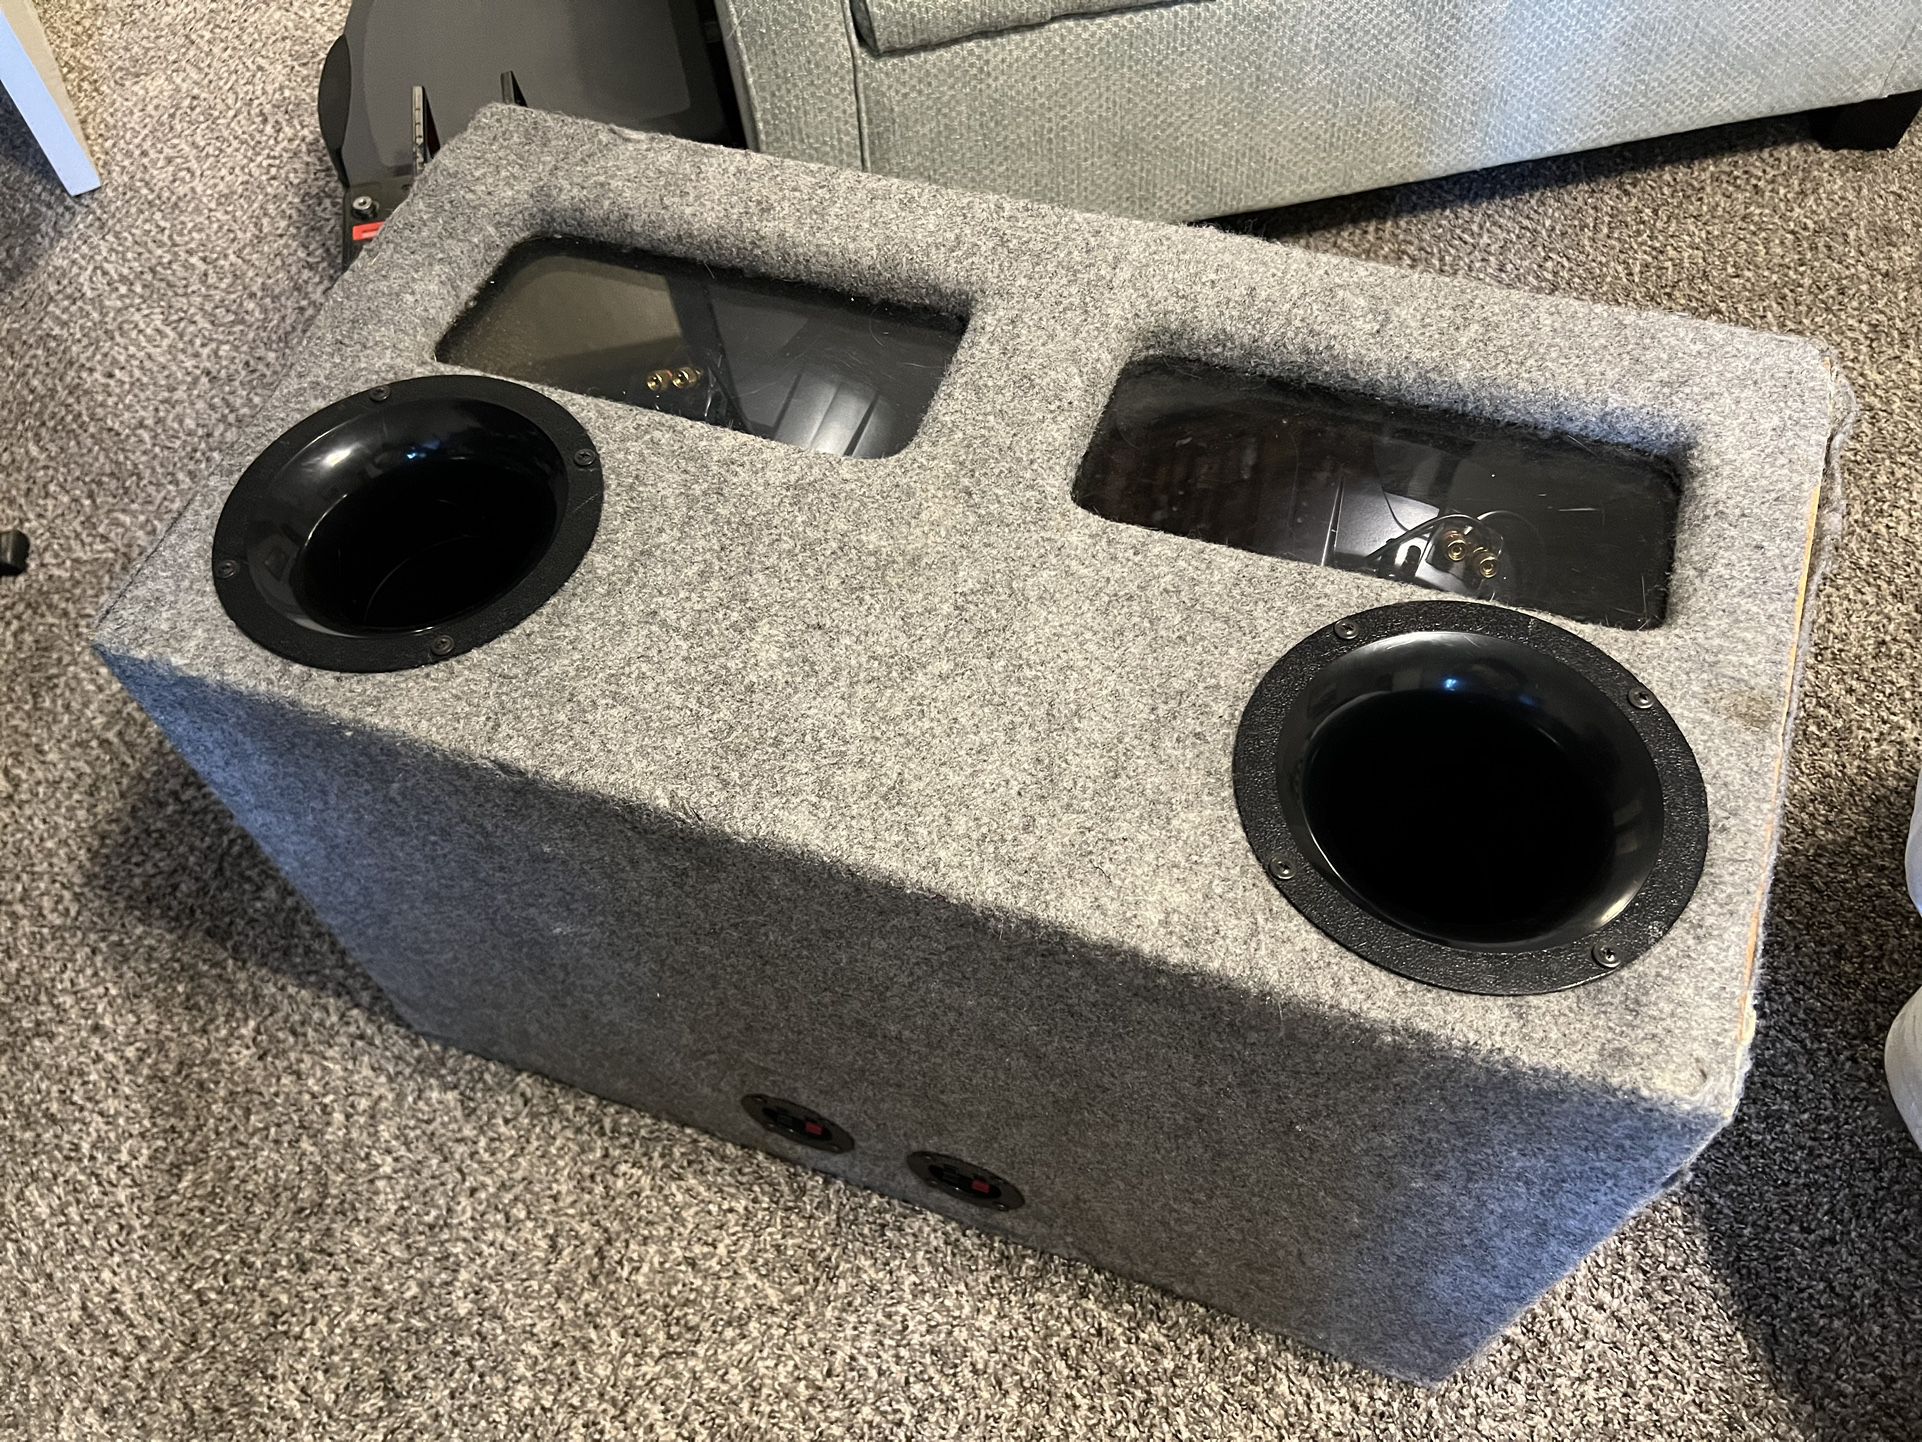 2 Tuned & Vented Infinity Kappa Perfect12d VQ Subwoofers